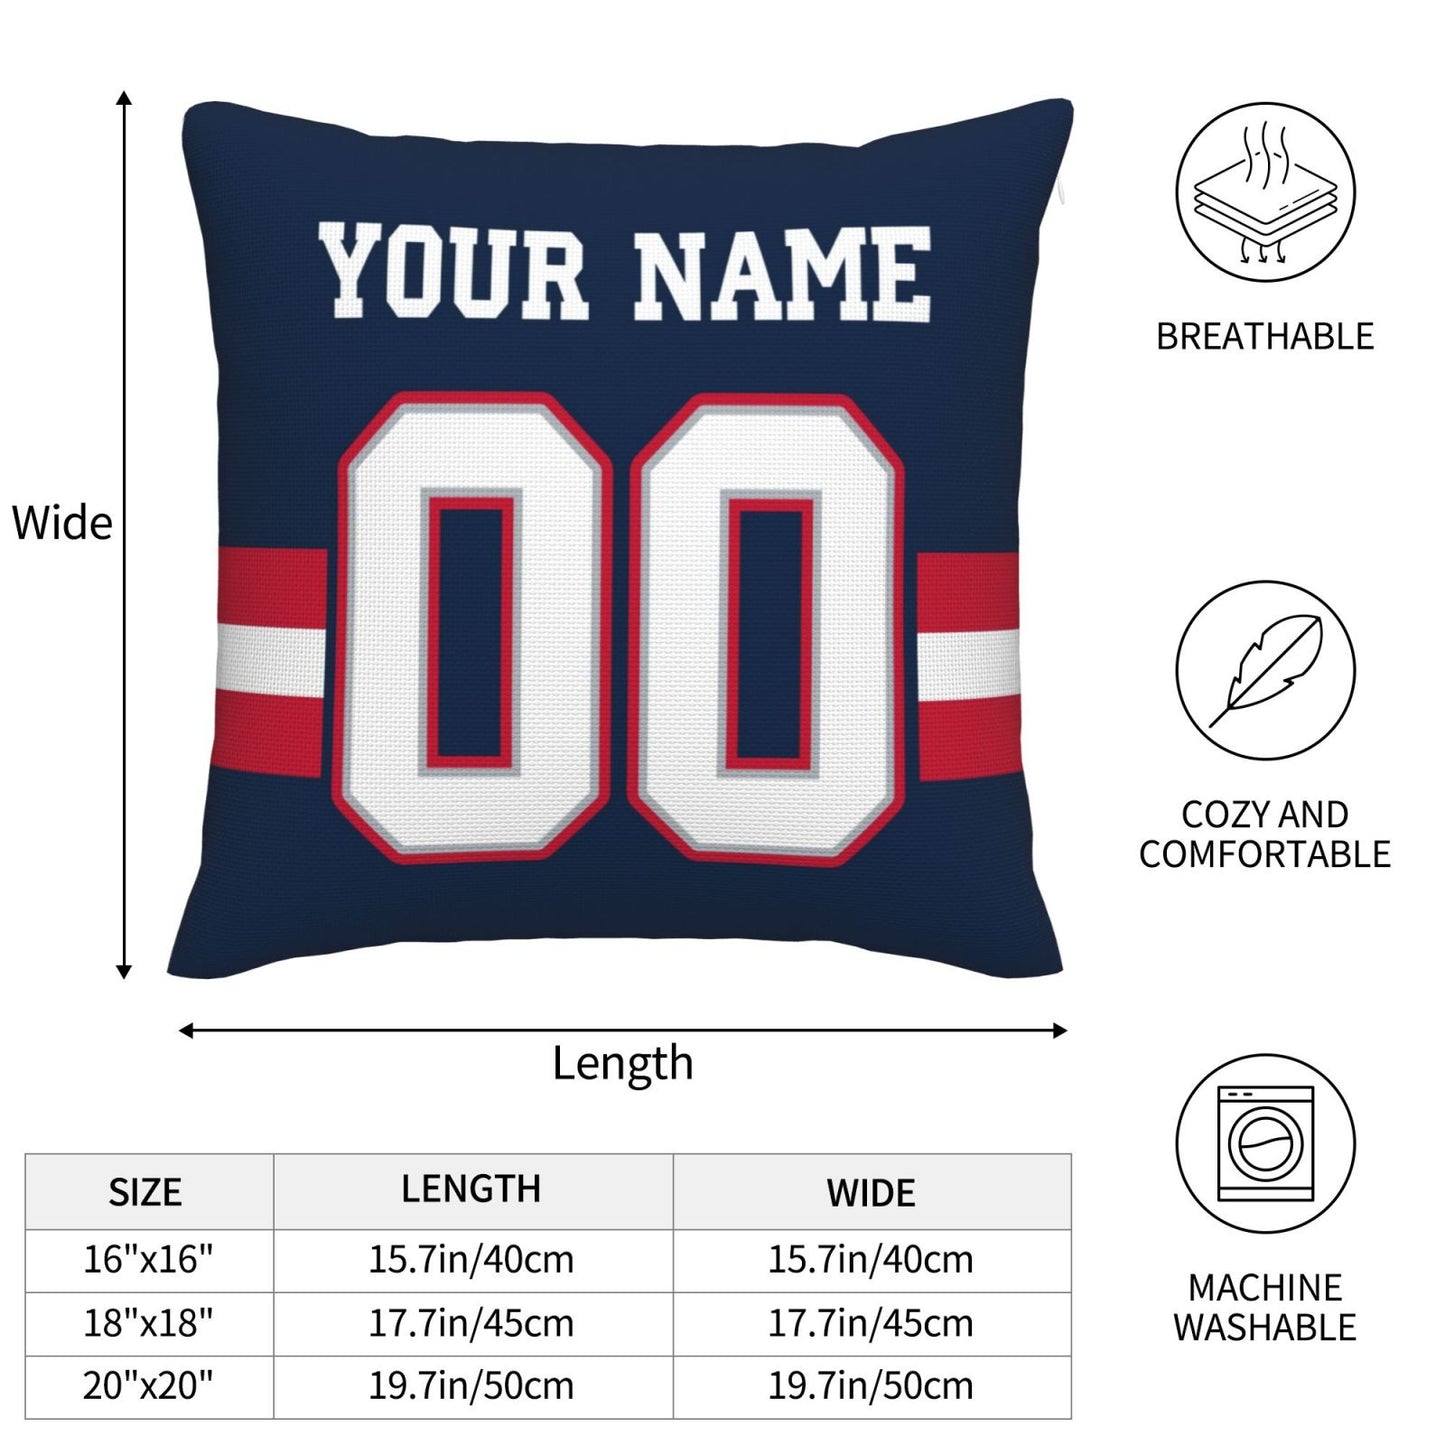 Customized New England Patriots Football Team Decorative Throw Pillow Case Print Personalized Football Style Fans Letters & Number Navy Pillowcase Birthday Gift